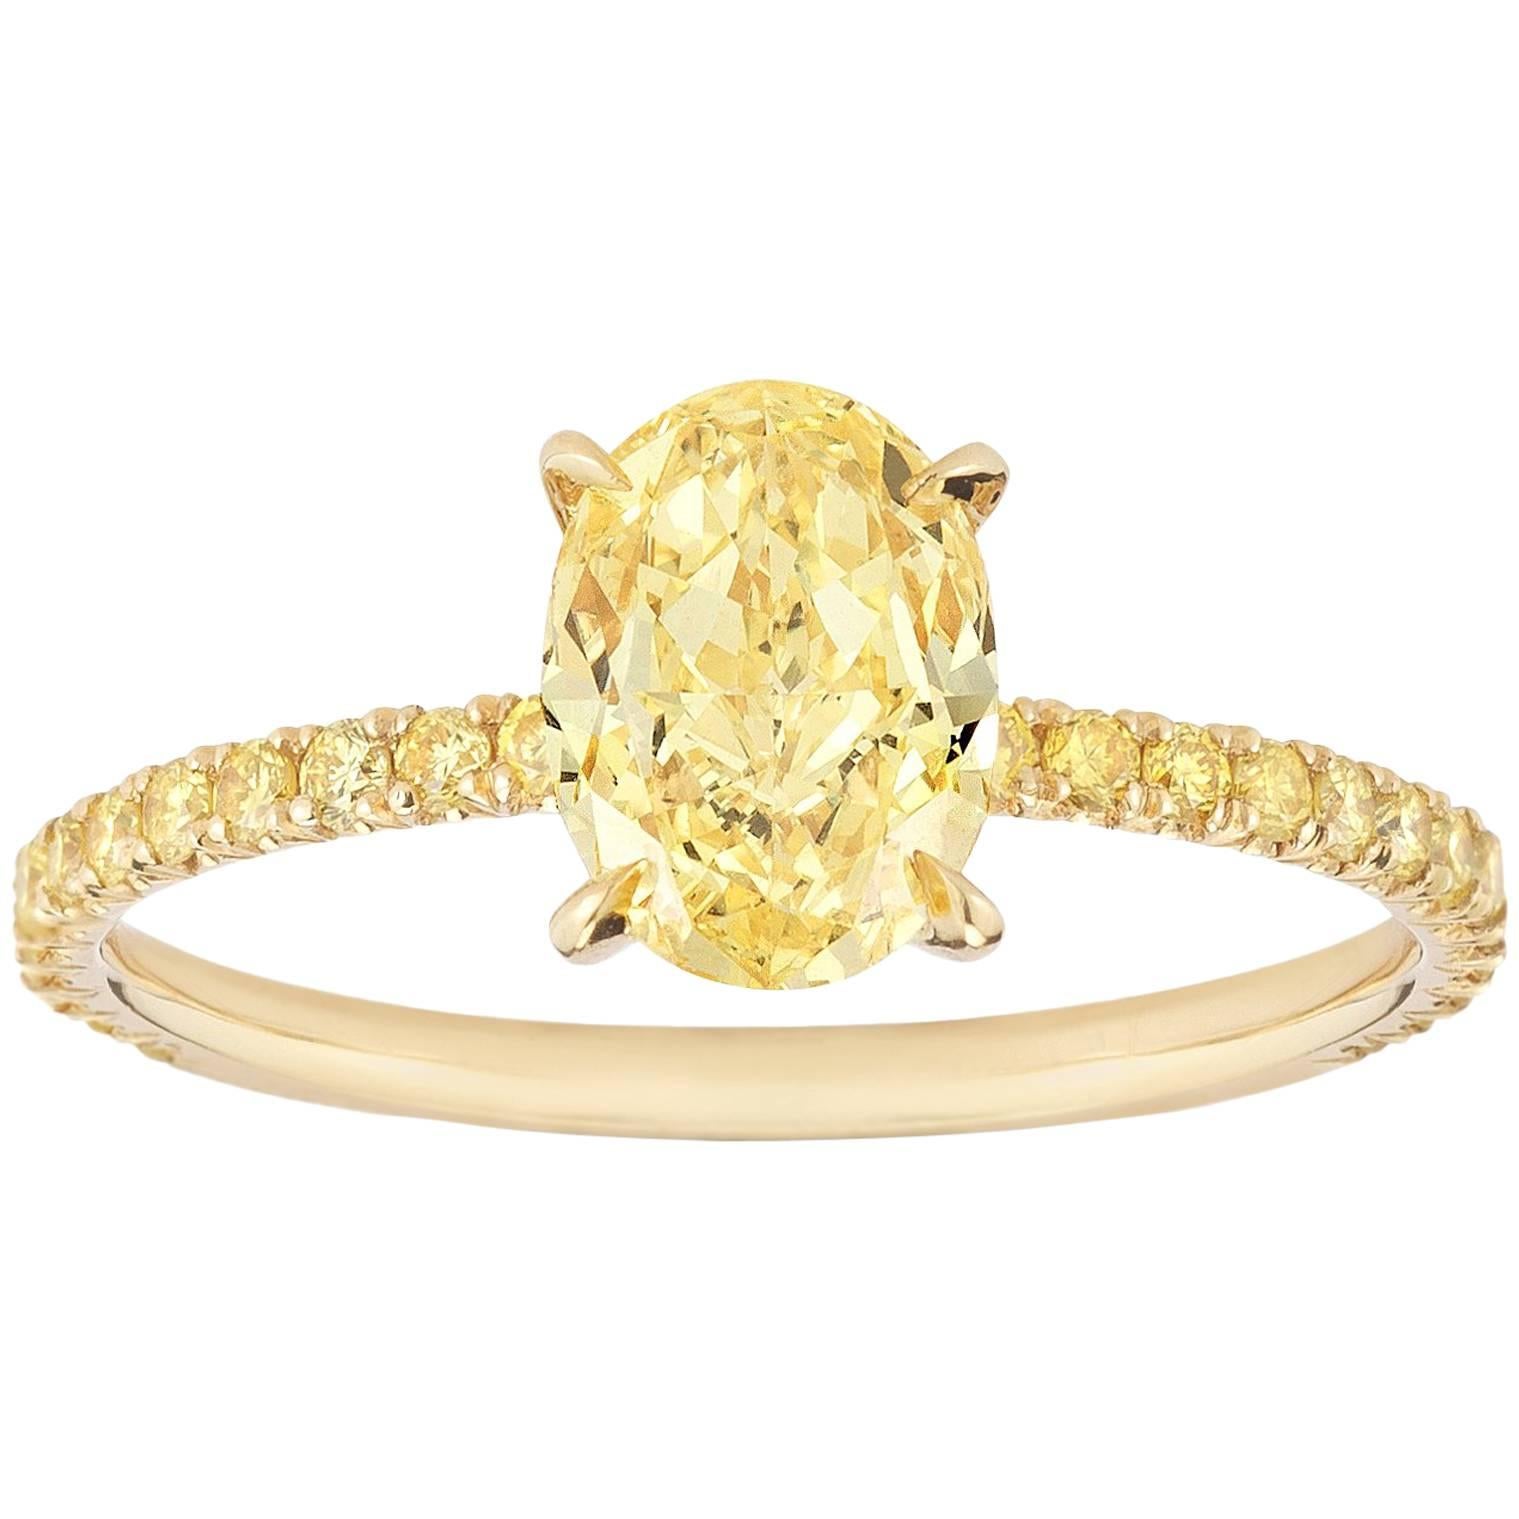 Marisa Perry Micro Pave Fancy Vivid Yellow Oval Diamond Engagement Ring For Sale